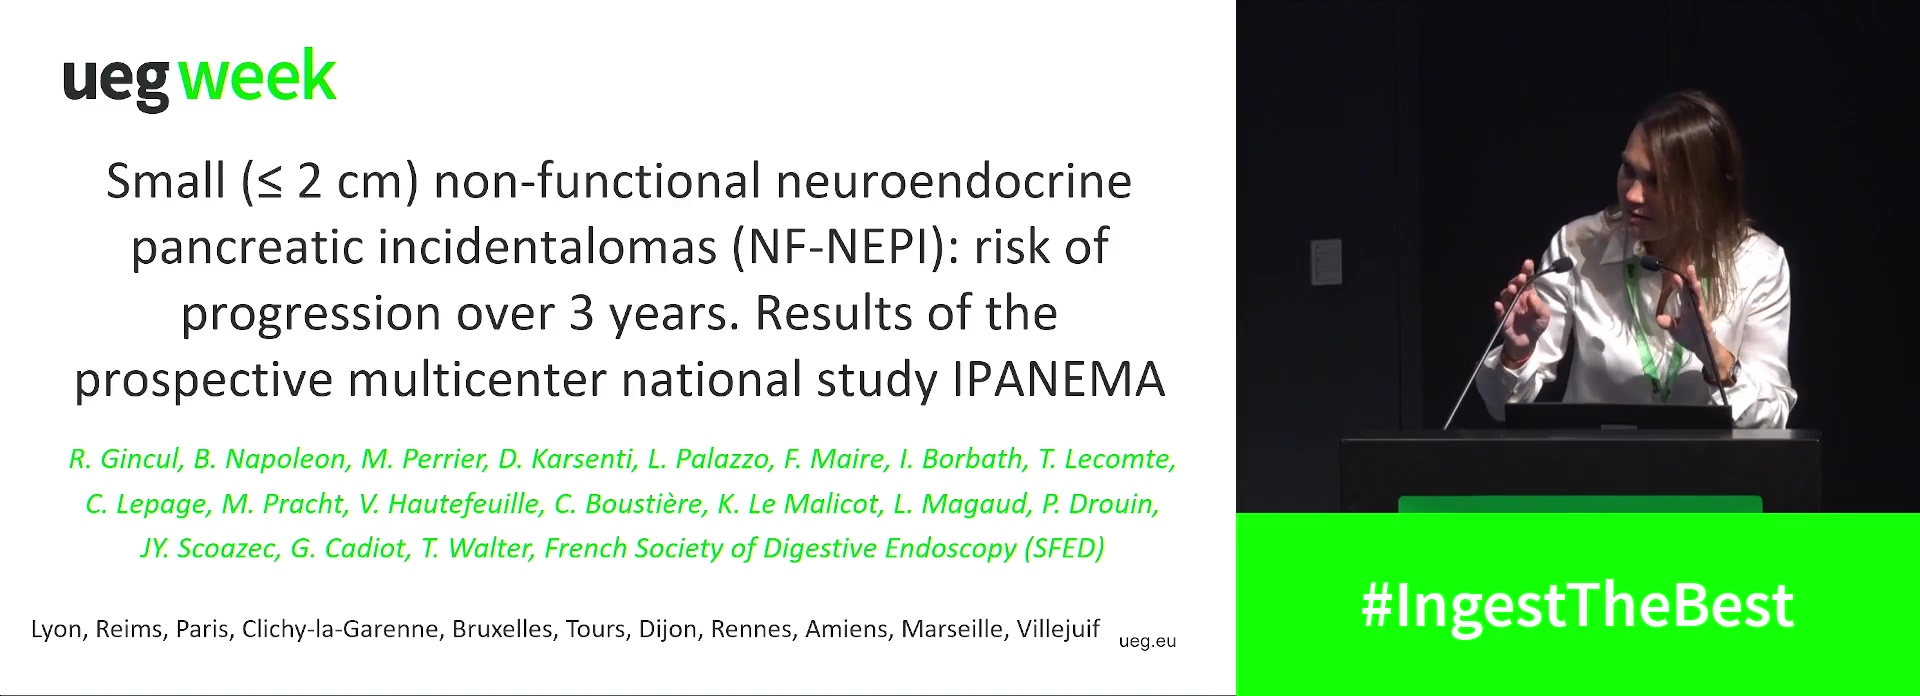 SMALL NON-FUNCTIONAL NEUROENDOCRINE PANCREATIC INCIDENTALOMAS (≤ 2 CM): RISK OF PROGRESSION OVER 3 YEARS. RESULTS OF THE PROSPECTIVE MULTICENTER FRENCH NATIONAL STUDY IPANEMA